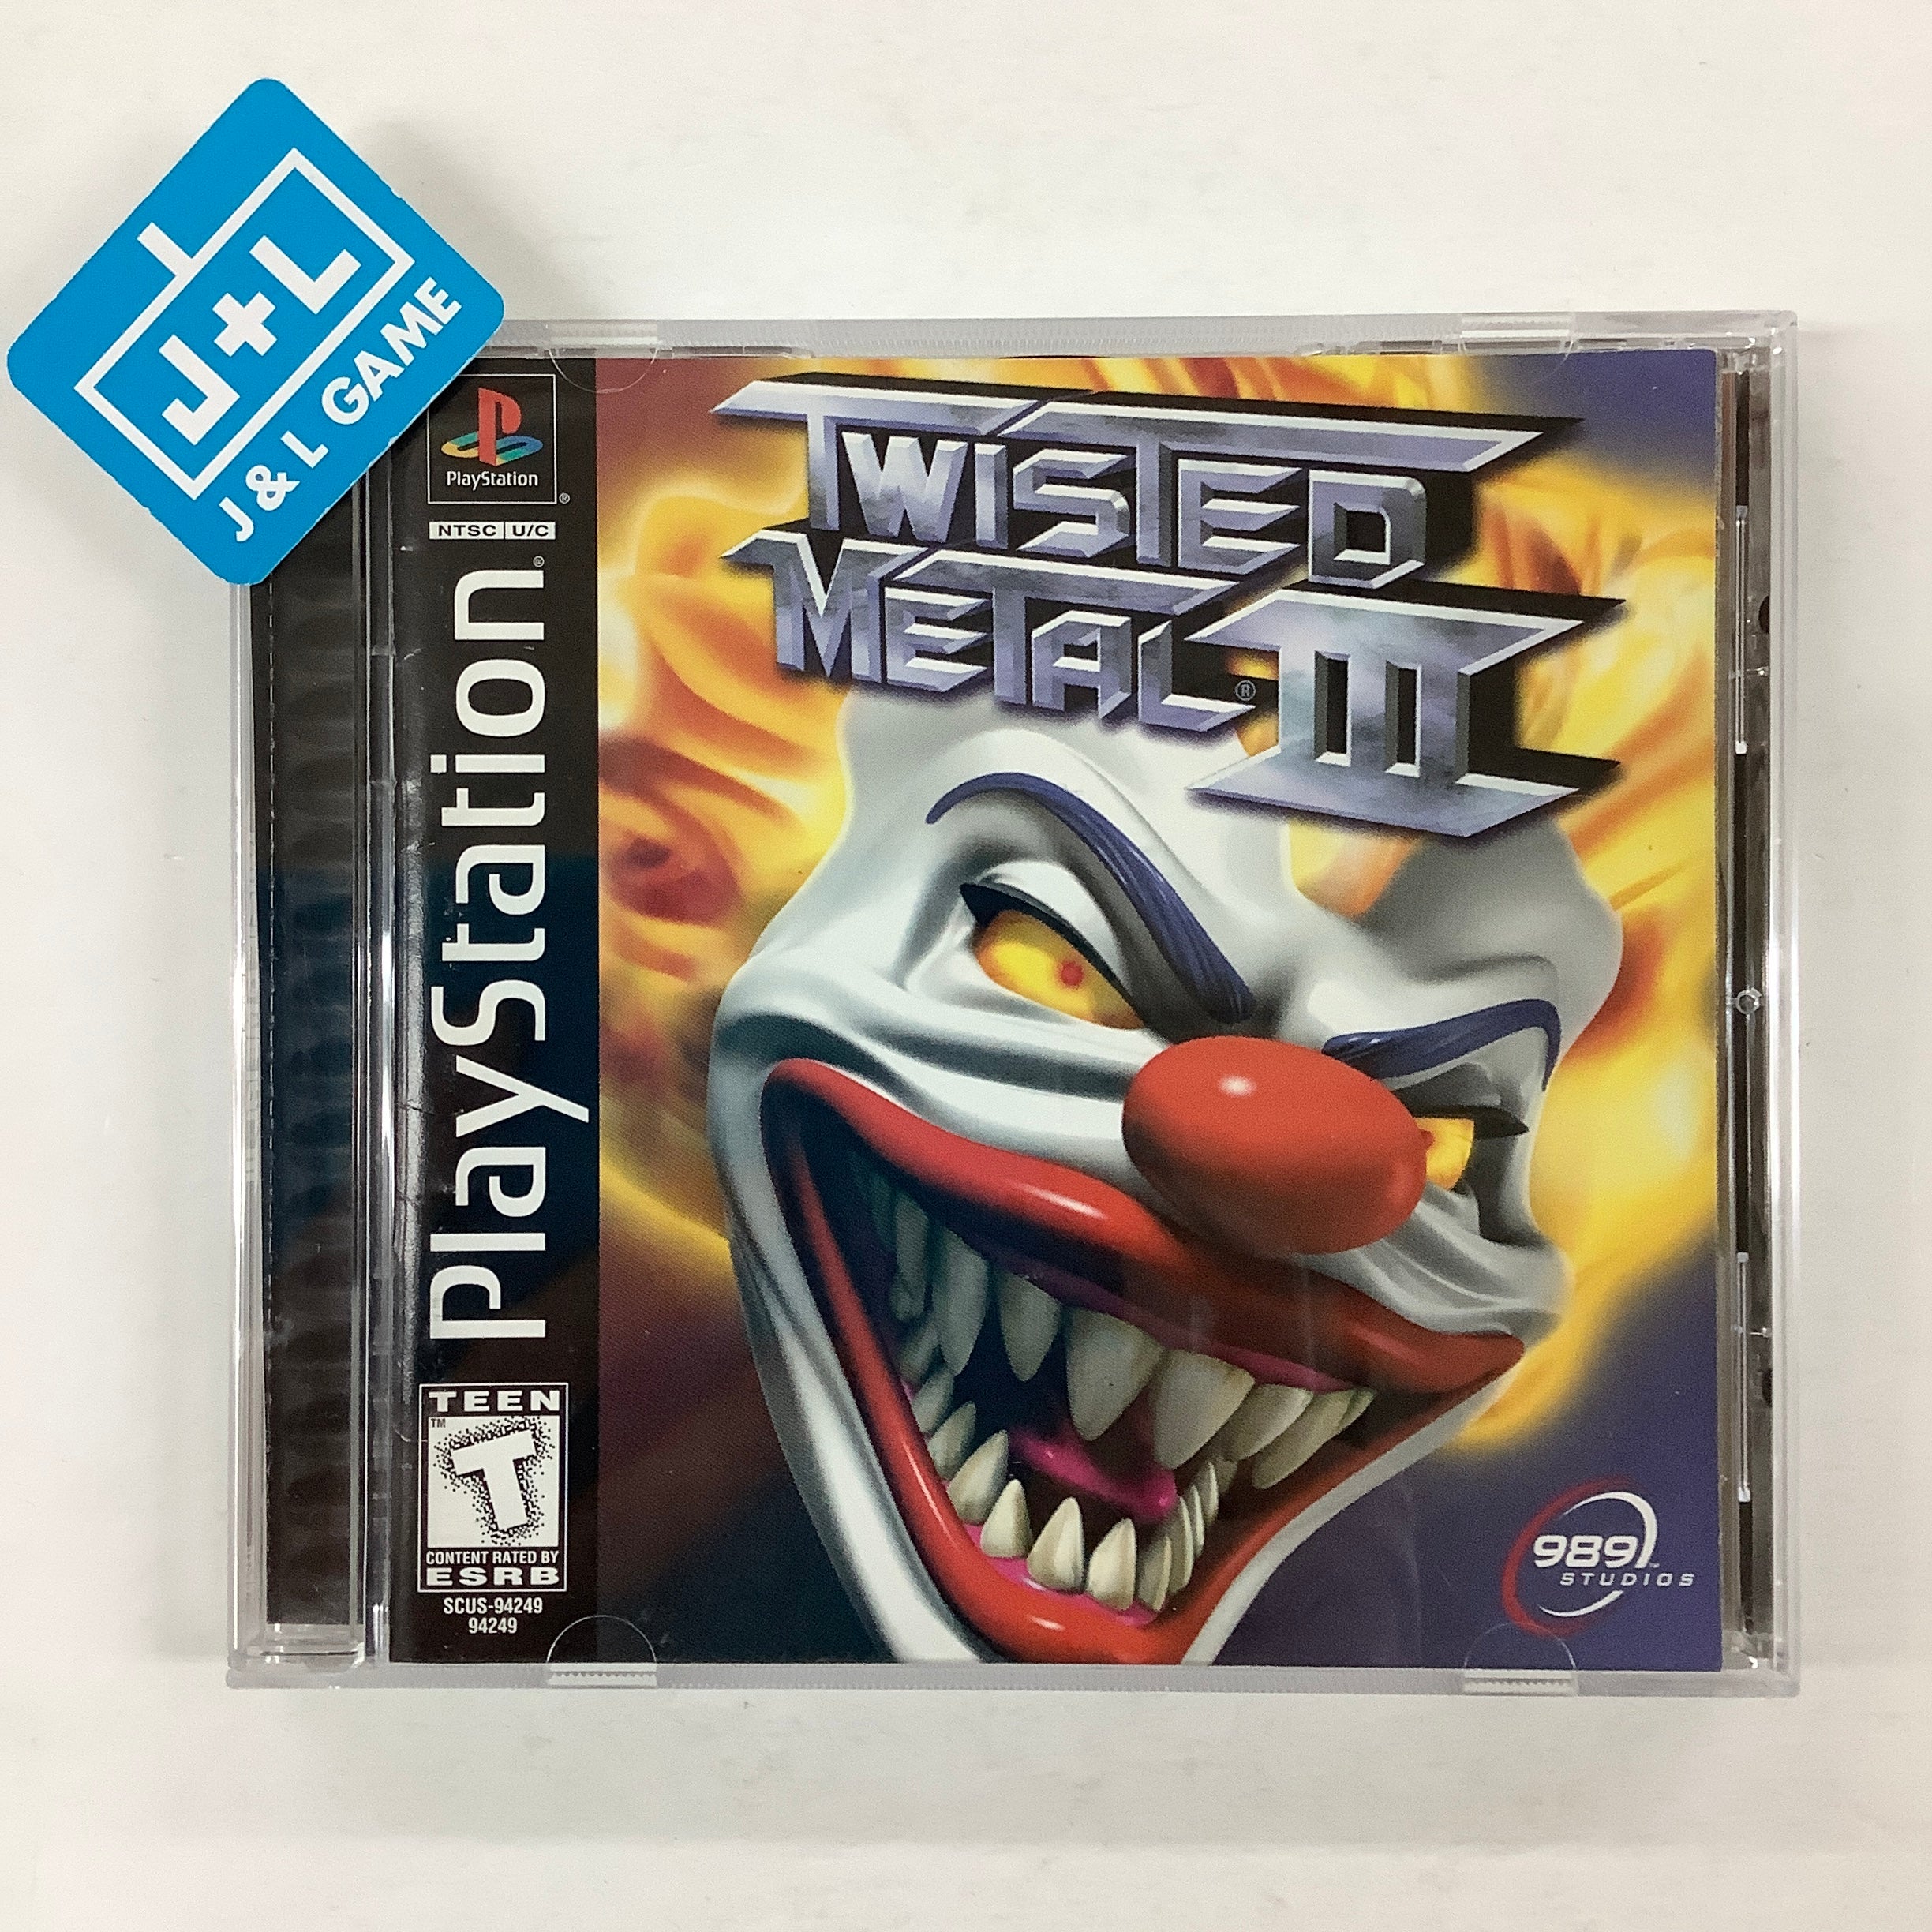 Twisted Metal III - (PS1) PlayStation 1 [Pre-Owned] Video Games 989 Studios   